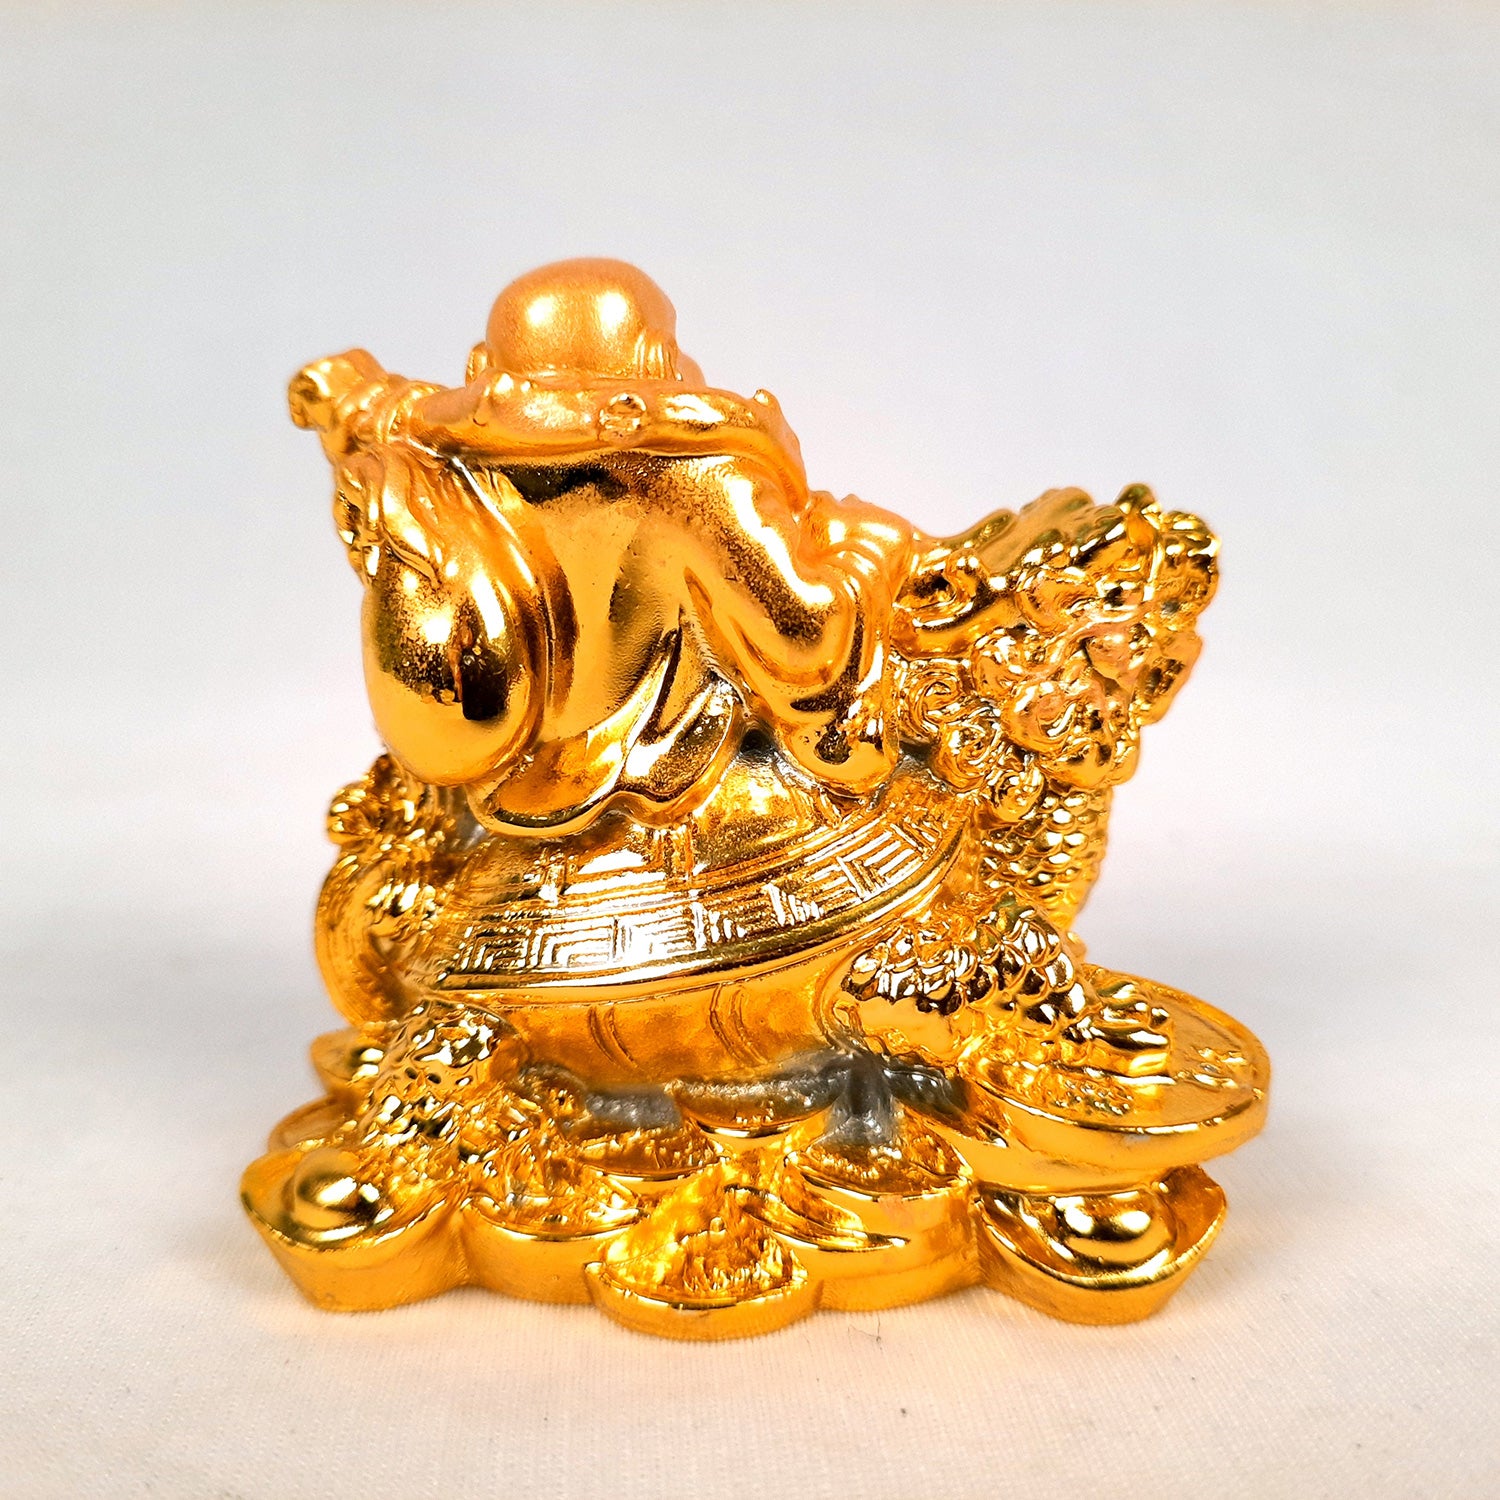 Laughing Buddha Showpiece With Money Bag | Laughing Buddha Sitting on Tortoise Small Showpiece - for Good Luck, Home & Table Decor, Wealth, Prosperity & Gift - 3 Inch